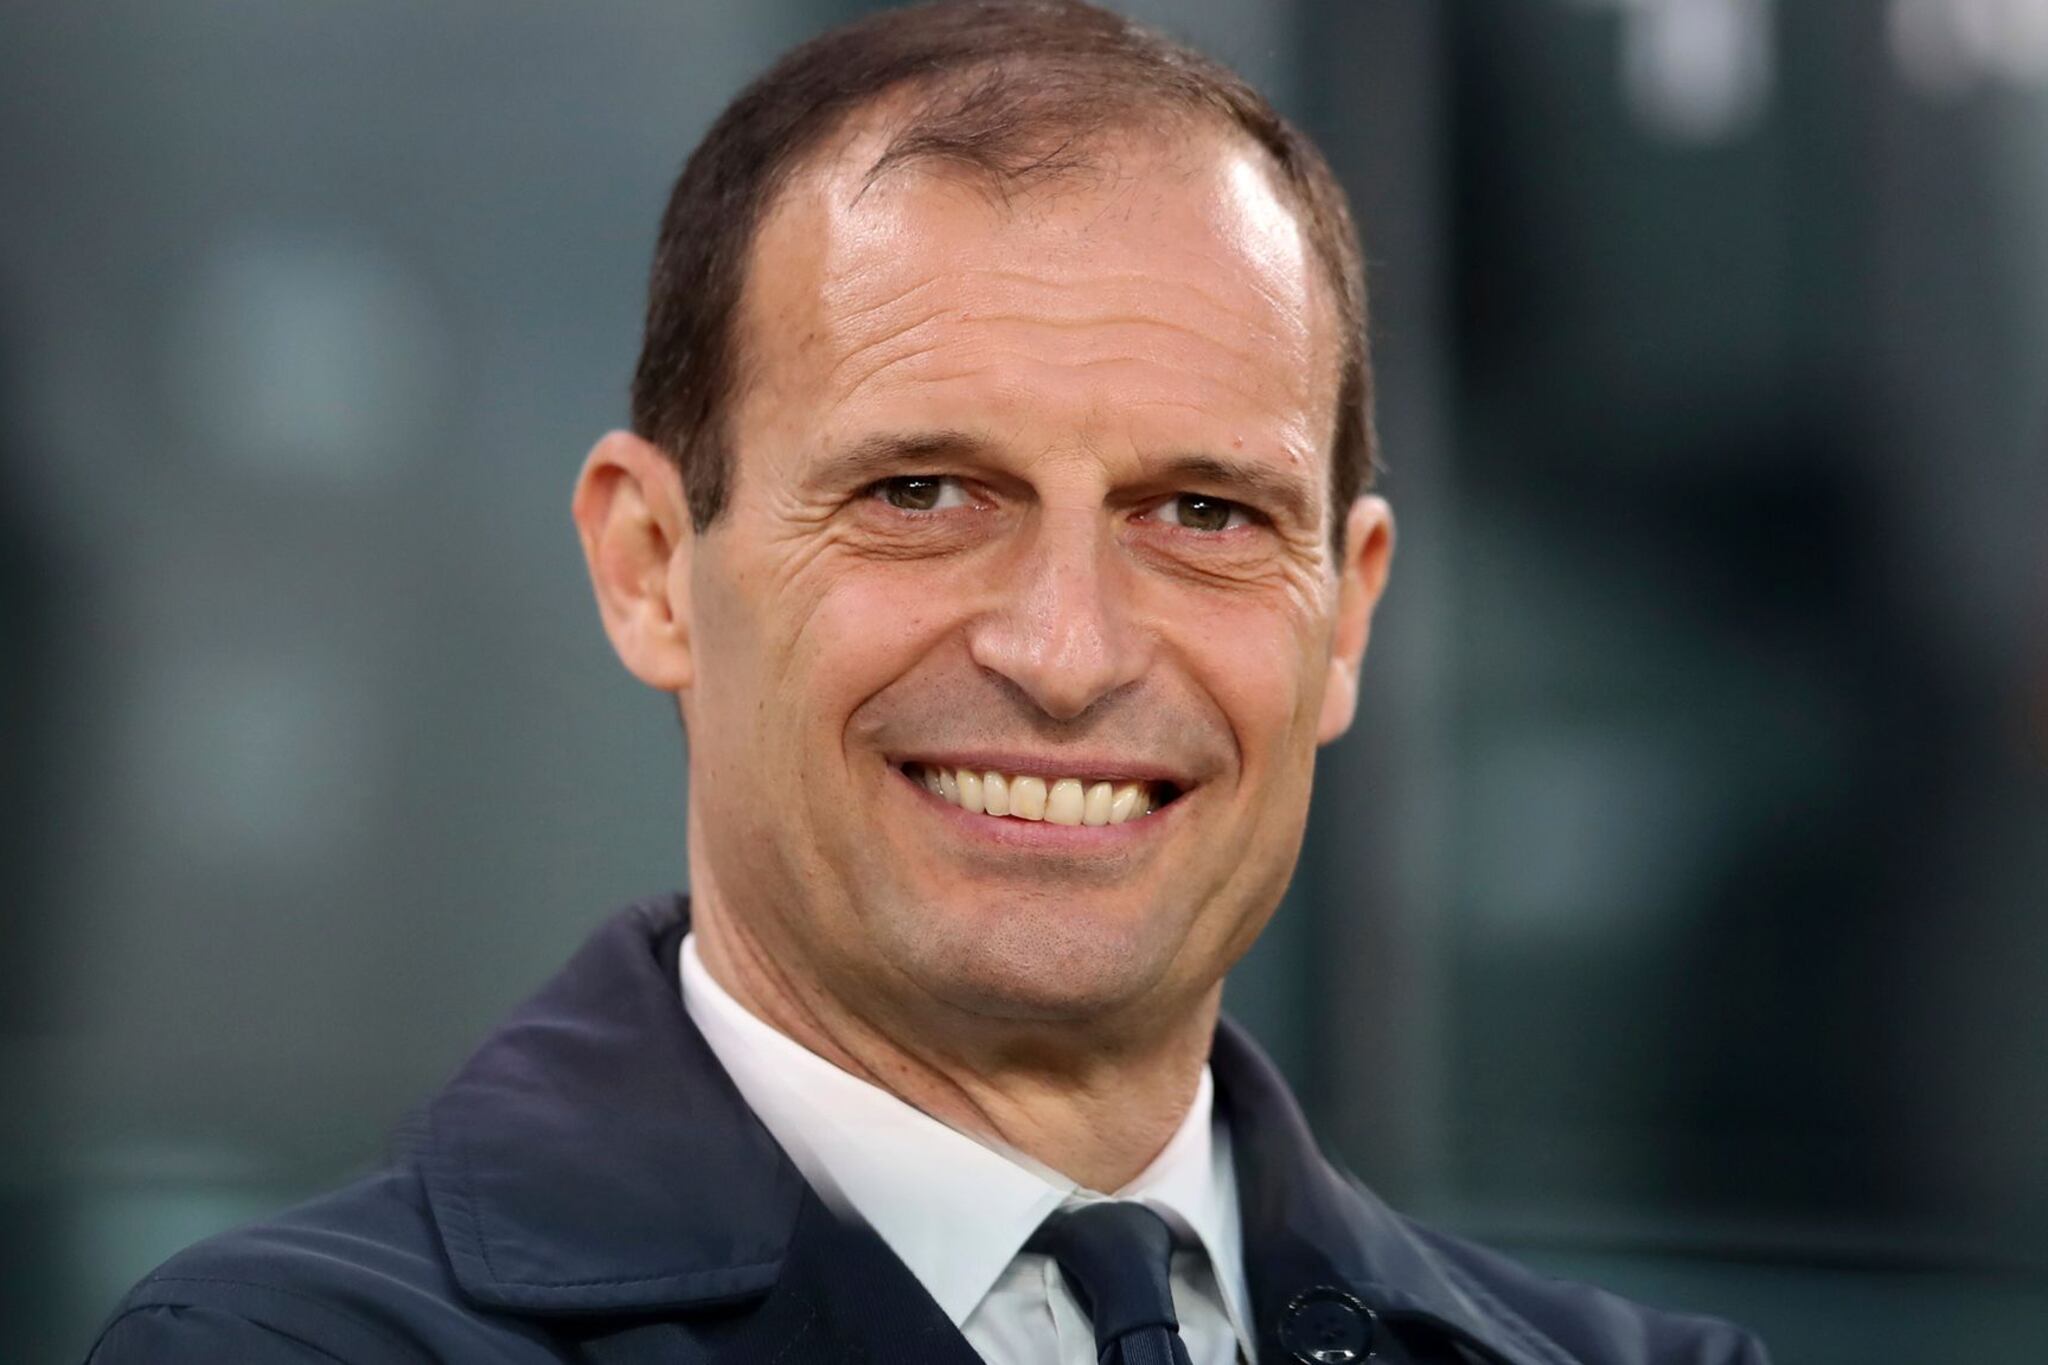 Massimiliano Allegri: how many trophies has the Juventus manager won and how much is his net worth?